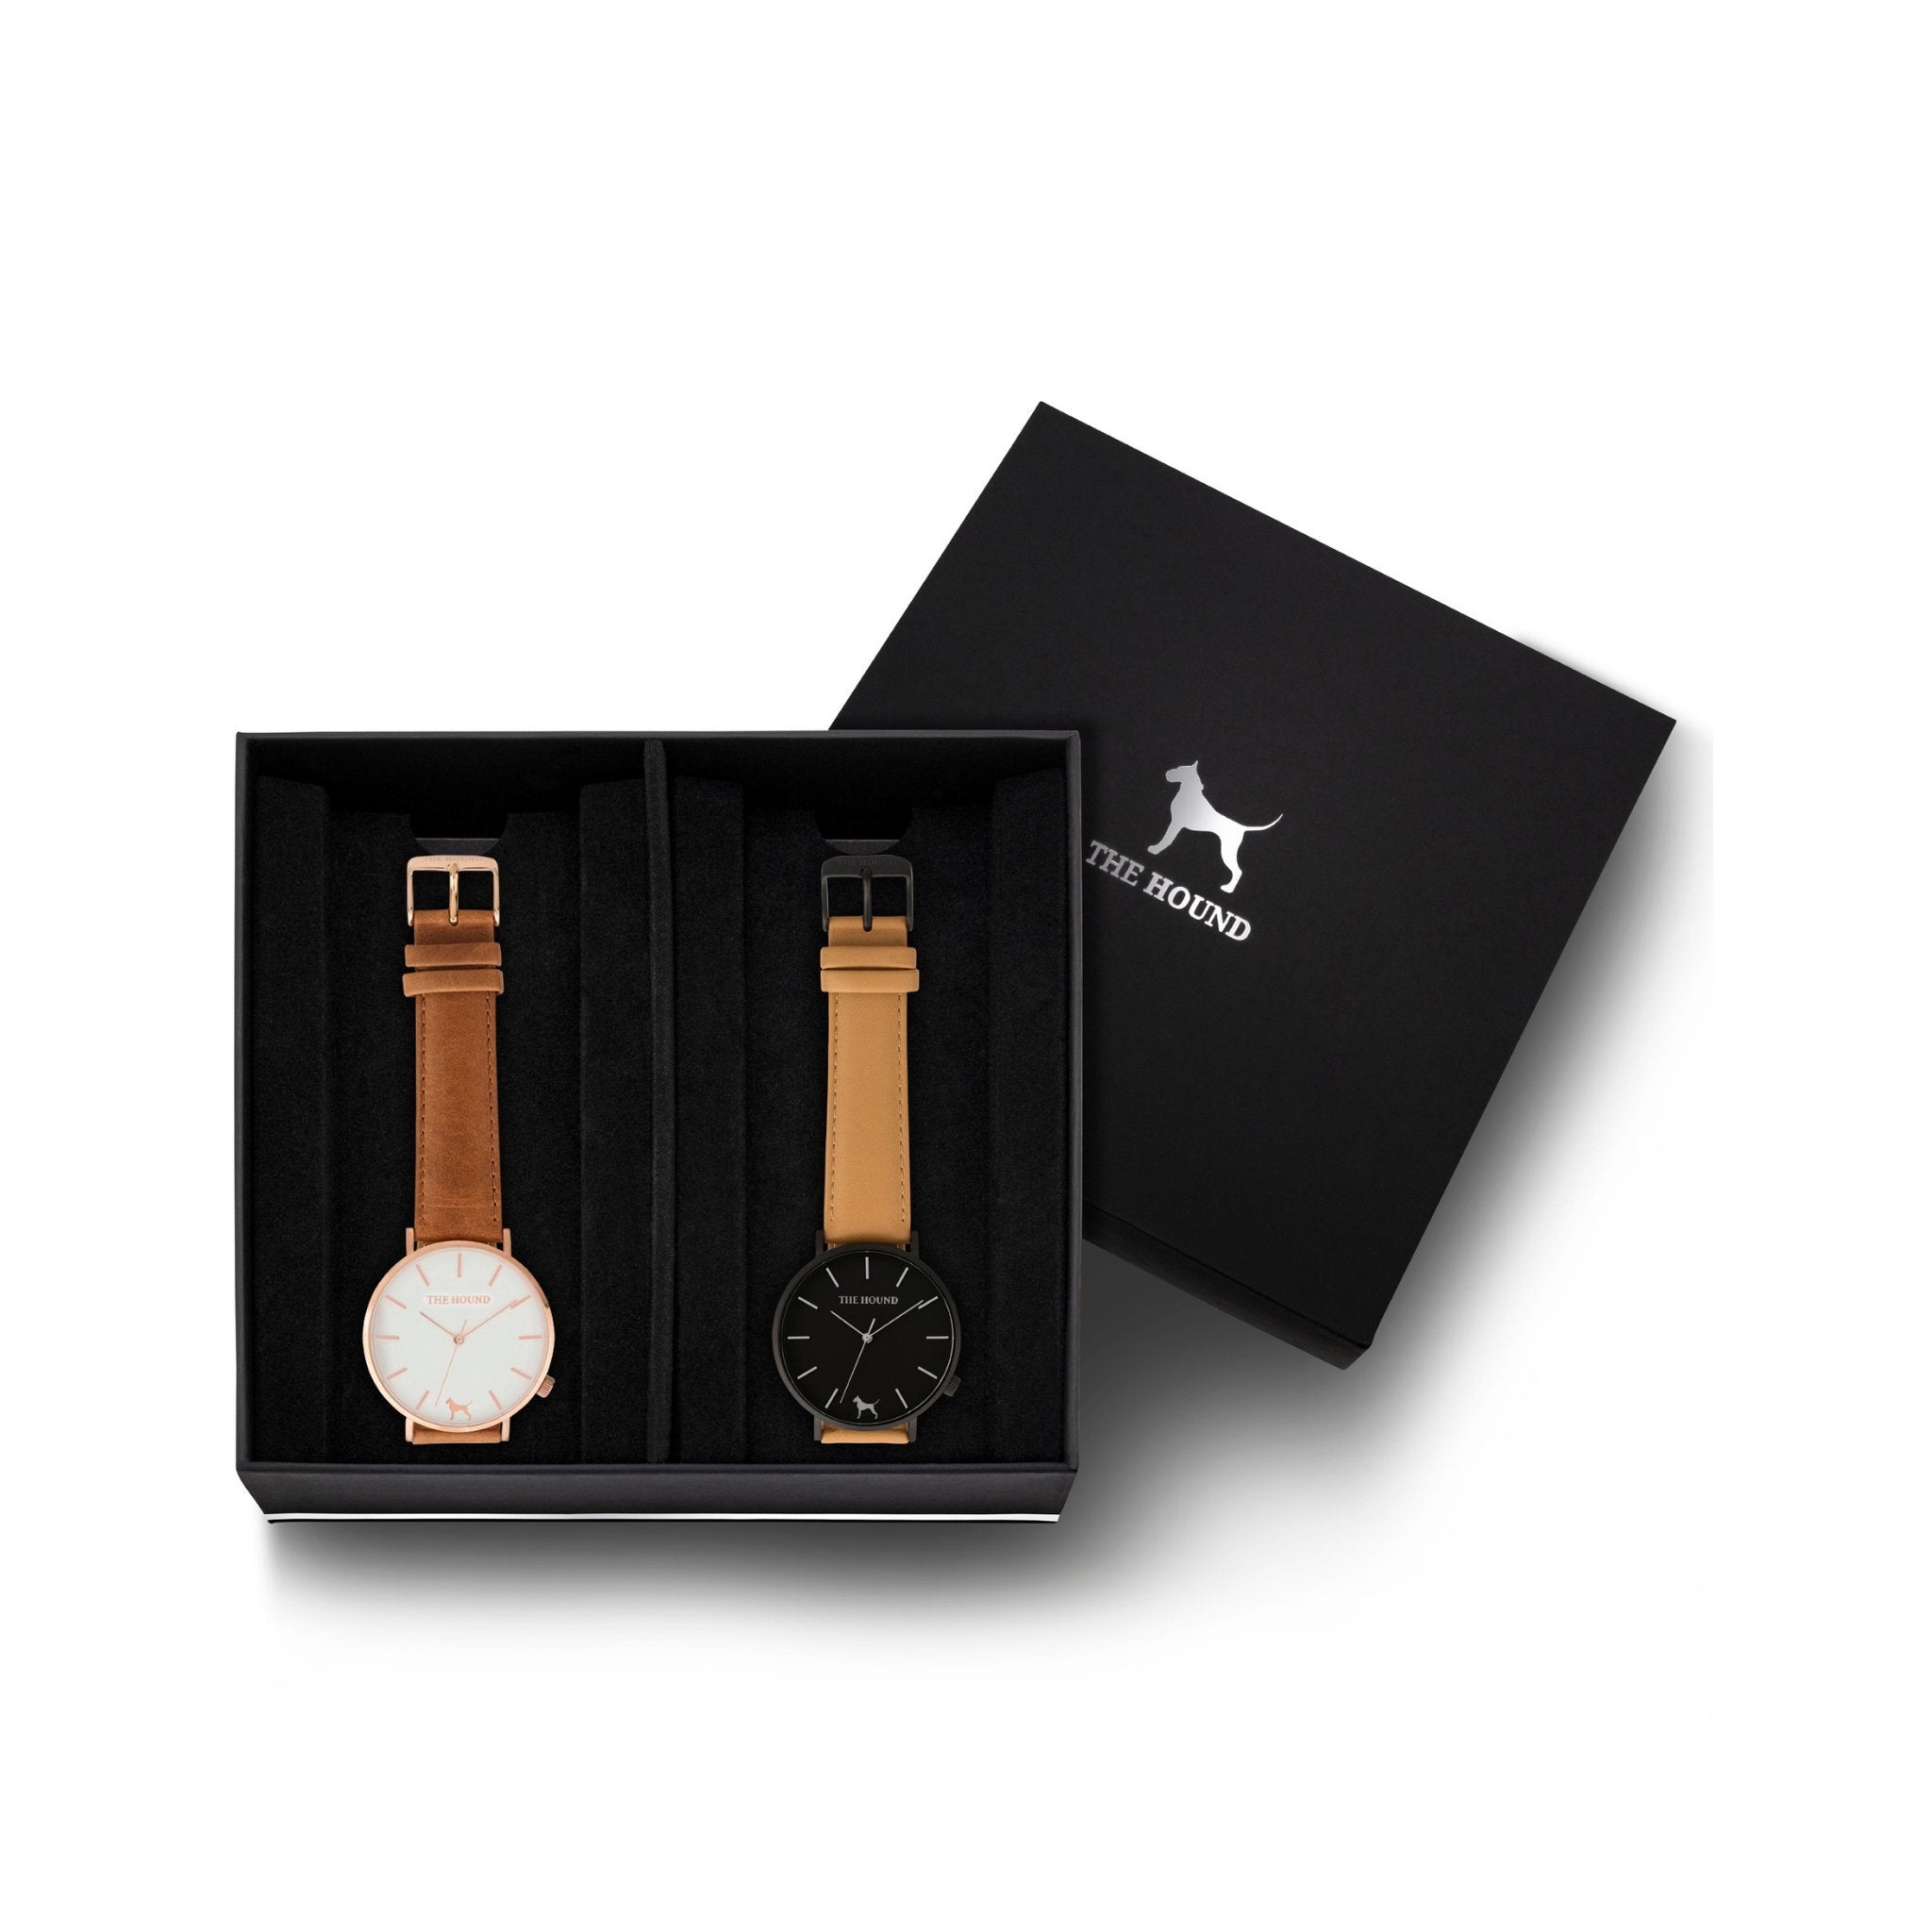 Custom gift set - Rose gold and white watch with stitched tan genuine leather band and a matte black and black watch with stitched camel genuine leather band